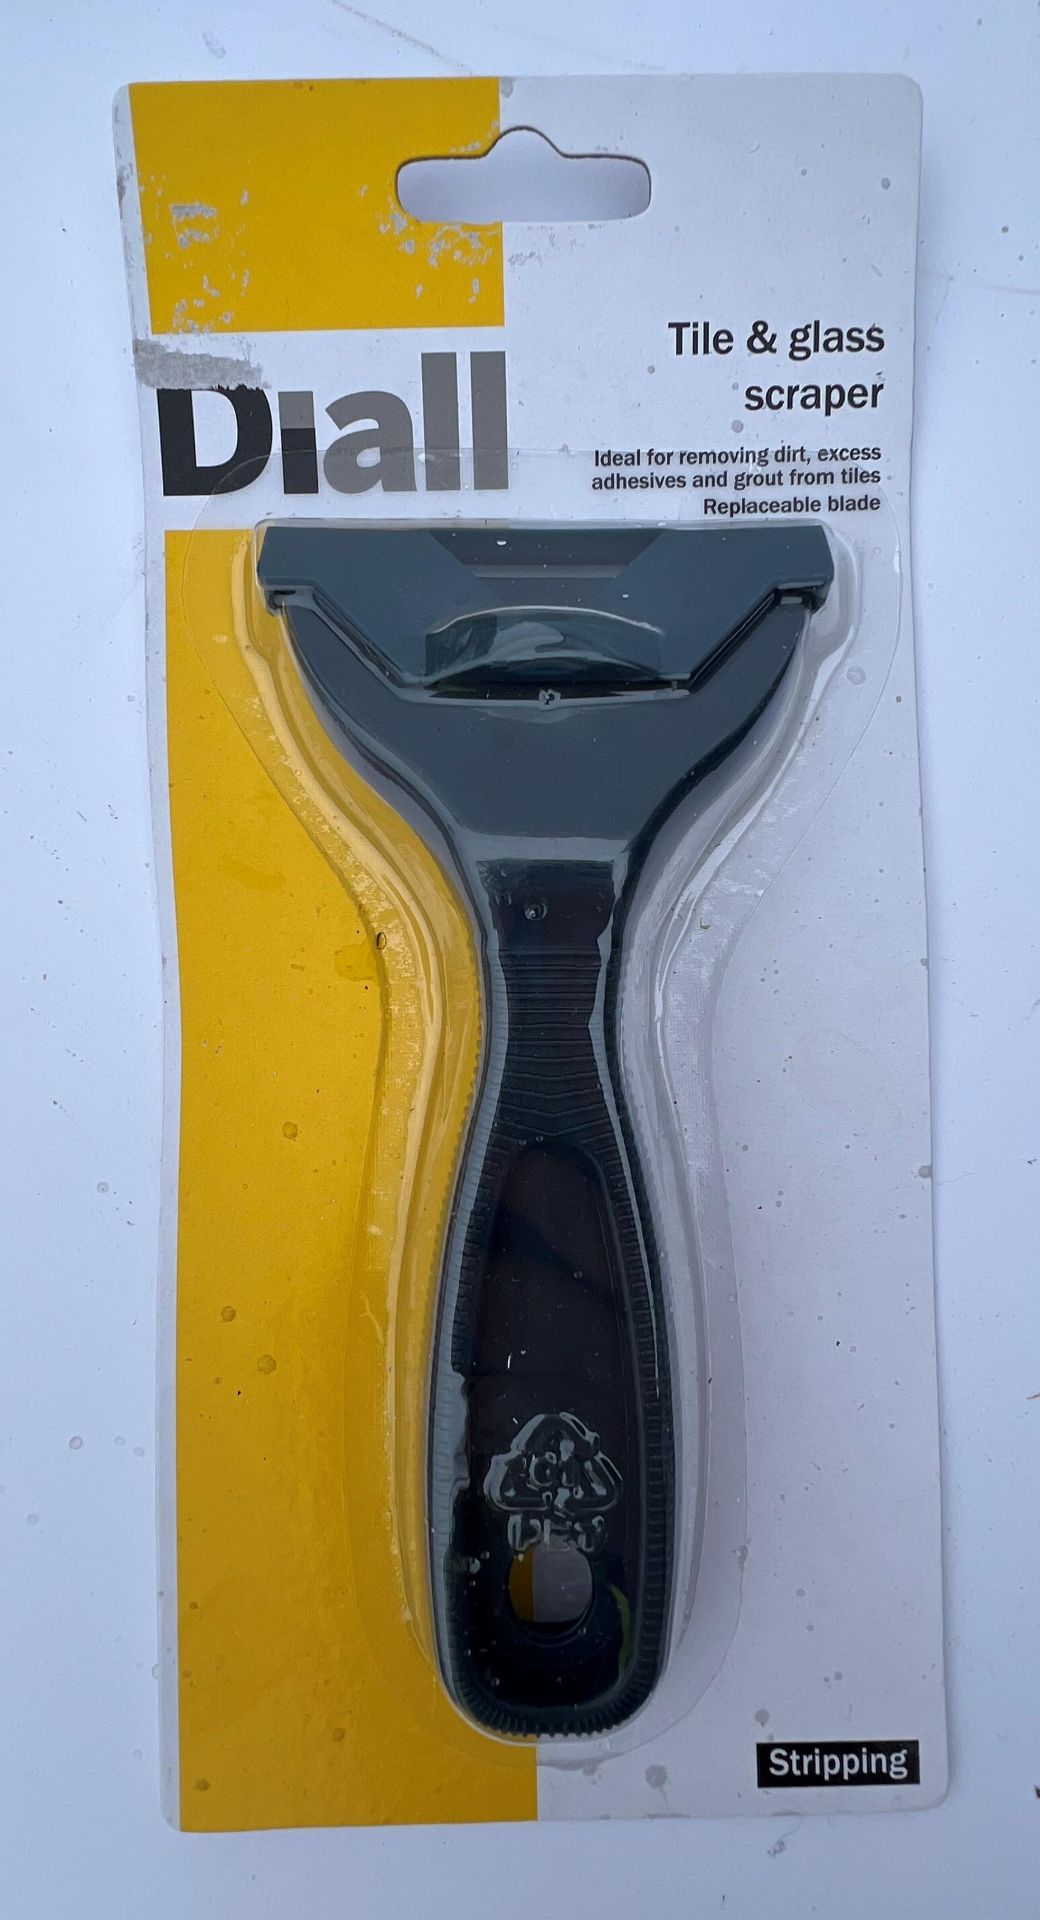 50 x new Diall tile and glass scrapers, RRP £4.